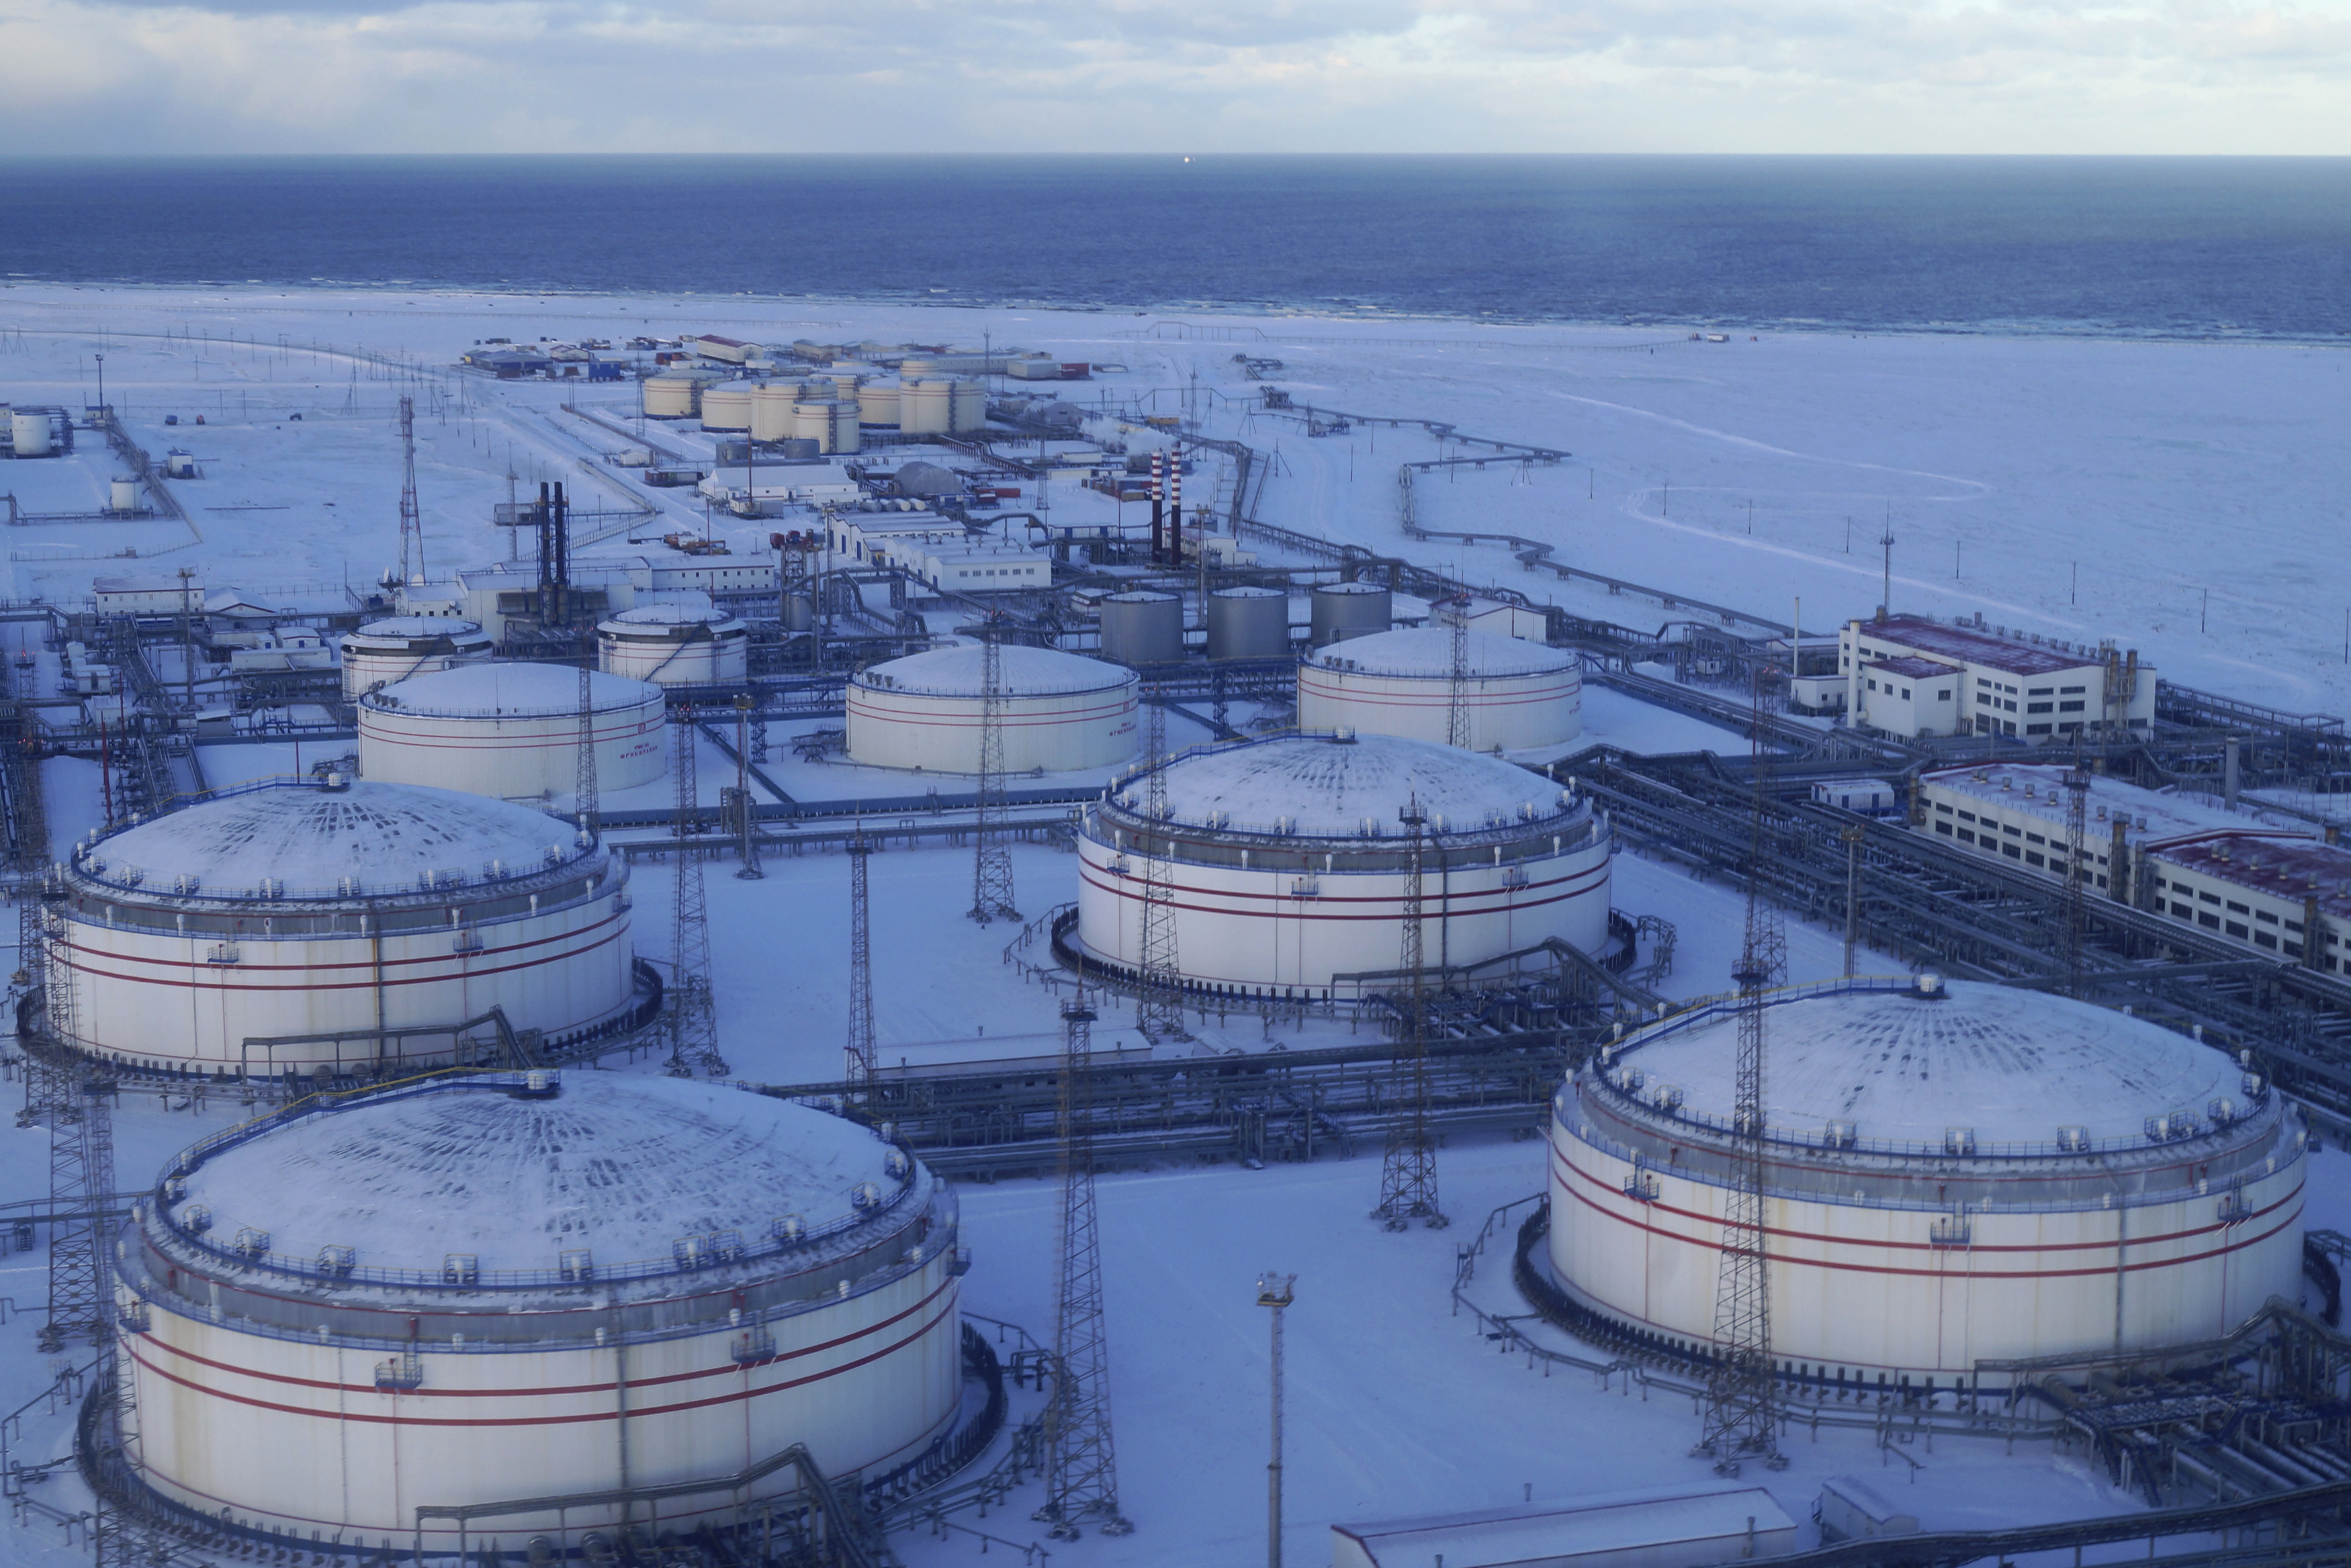 An aerial view shows a storage facility owned by Lukoil company at the Arctic port of Varandei